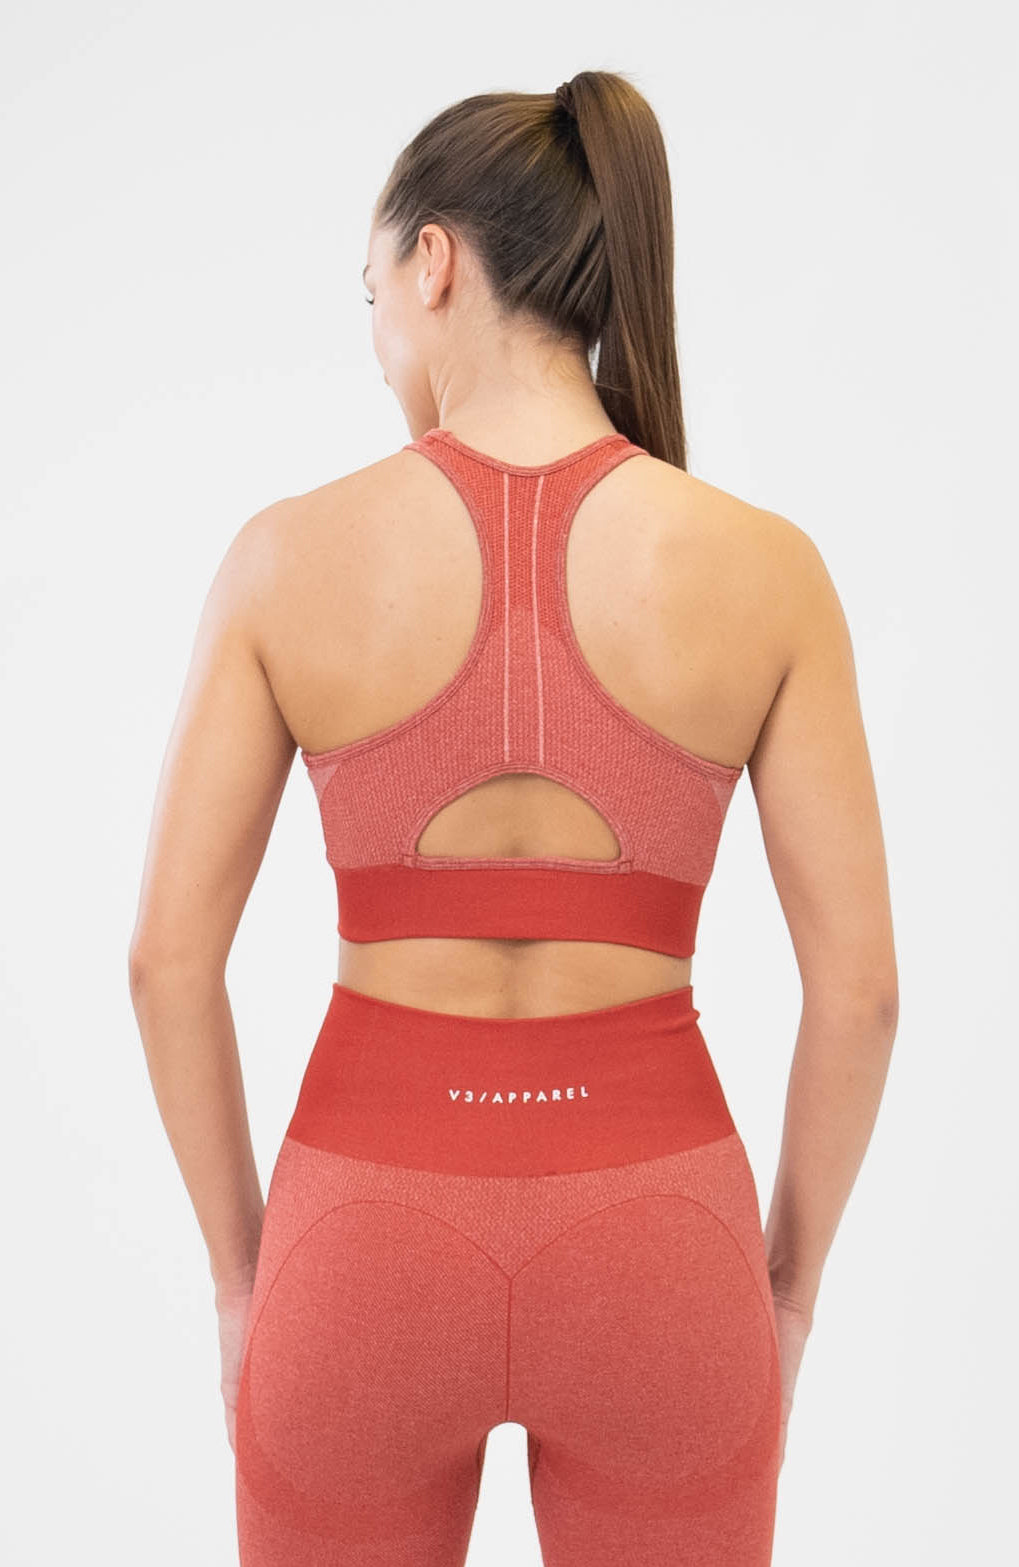 redbaysand Women's seamless Unity training sports bra in scarlet red with removable padded cups and strap for gym workouts training, Running, yoga, bodybuilding and bikini fitness.